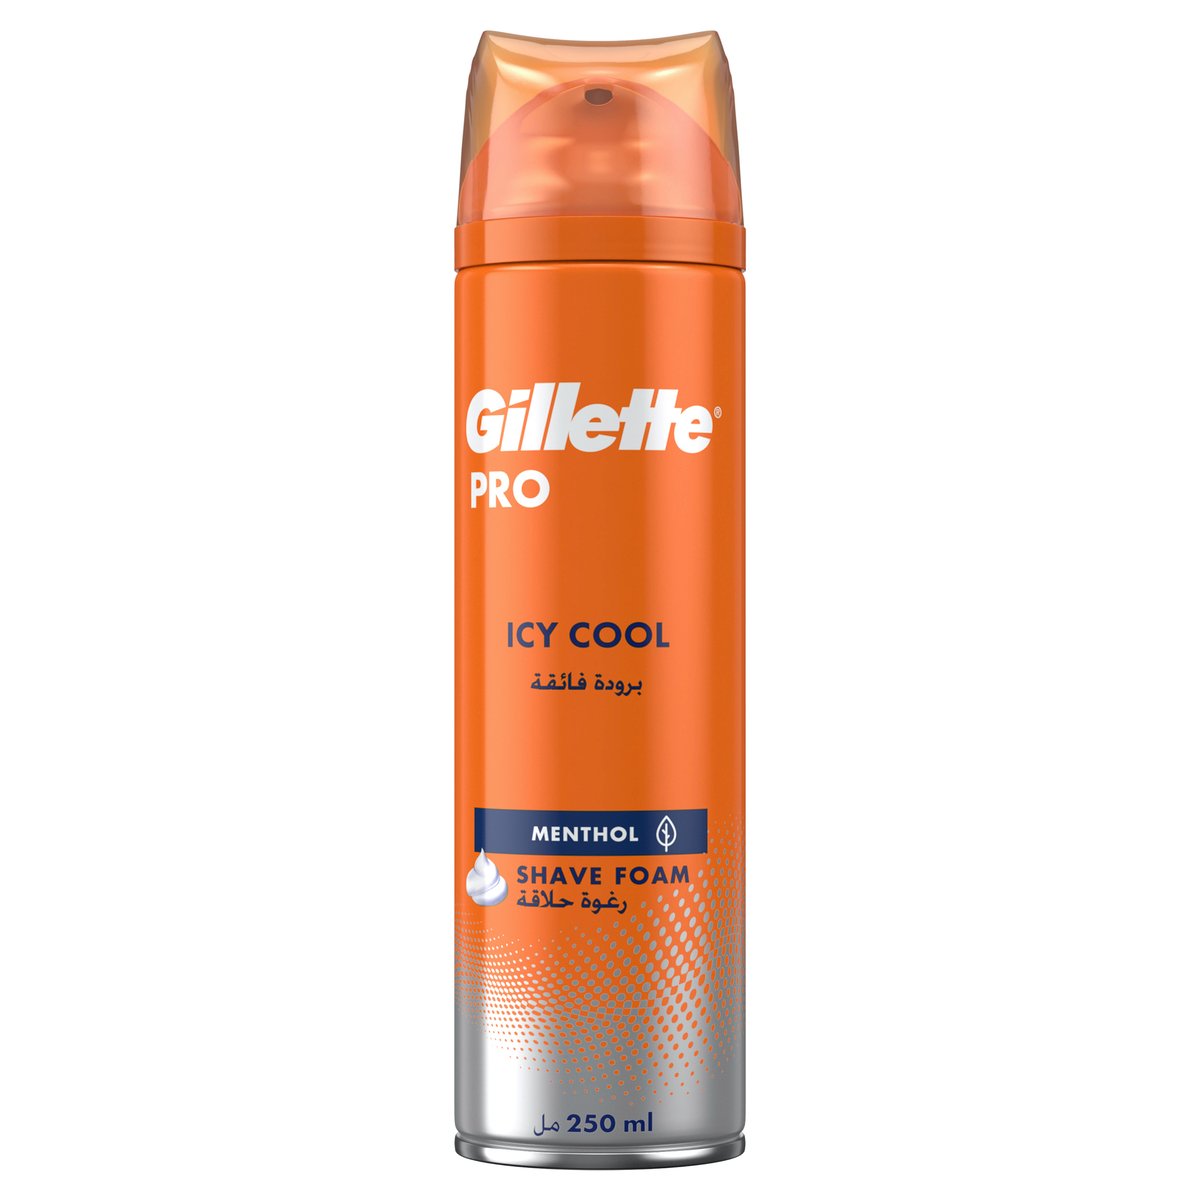 Gillette Pro Shave Foam Icy Cool Menthol 250 ml